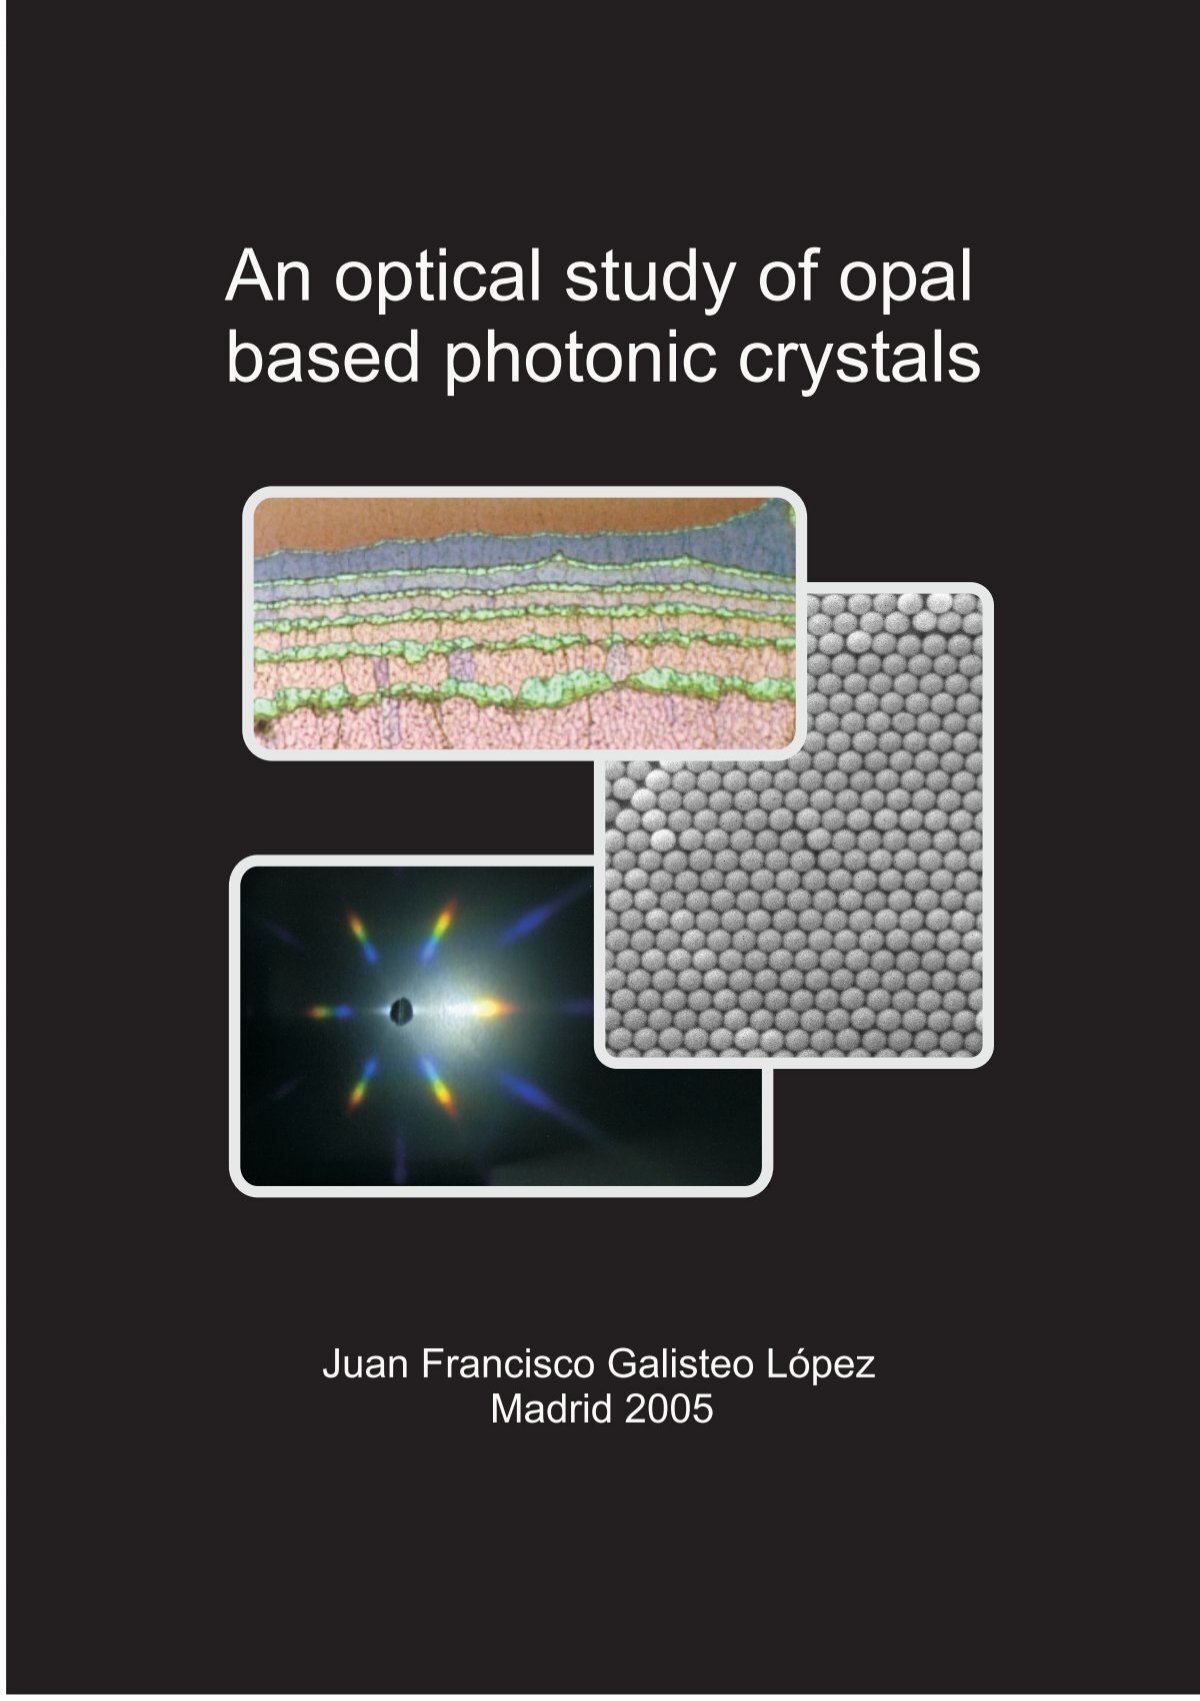 An optical study of opal based photonic crystals